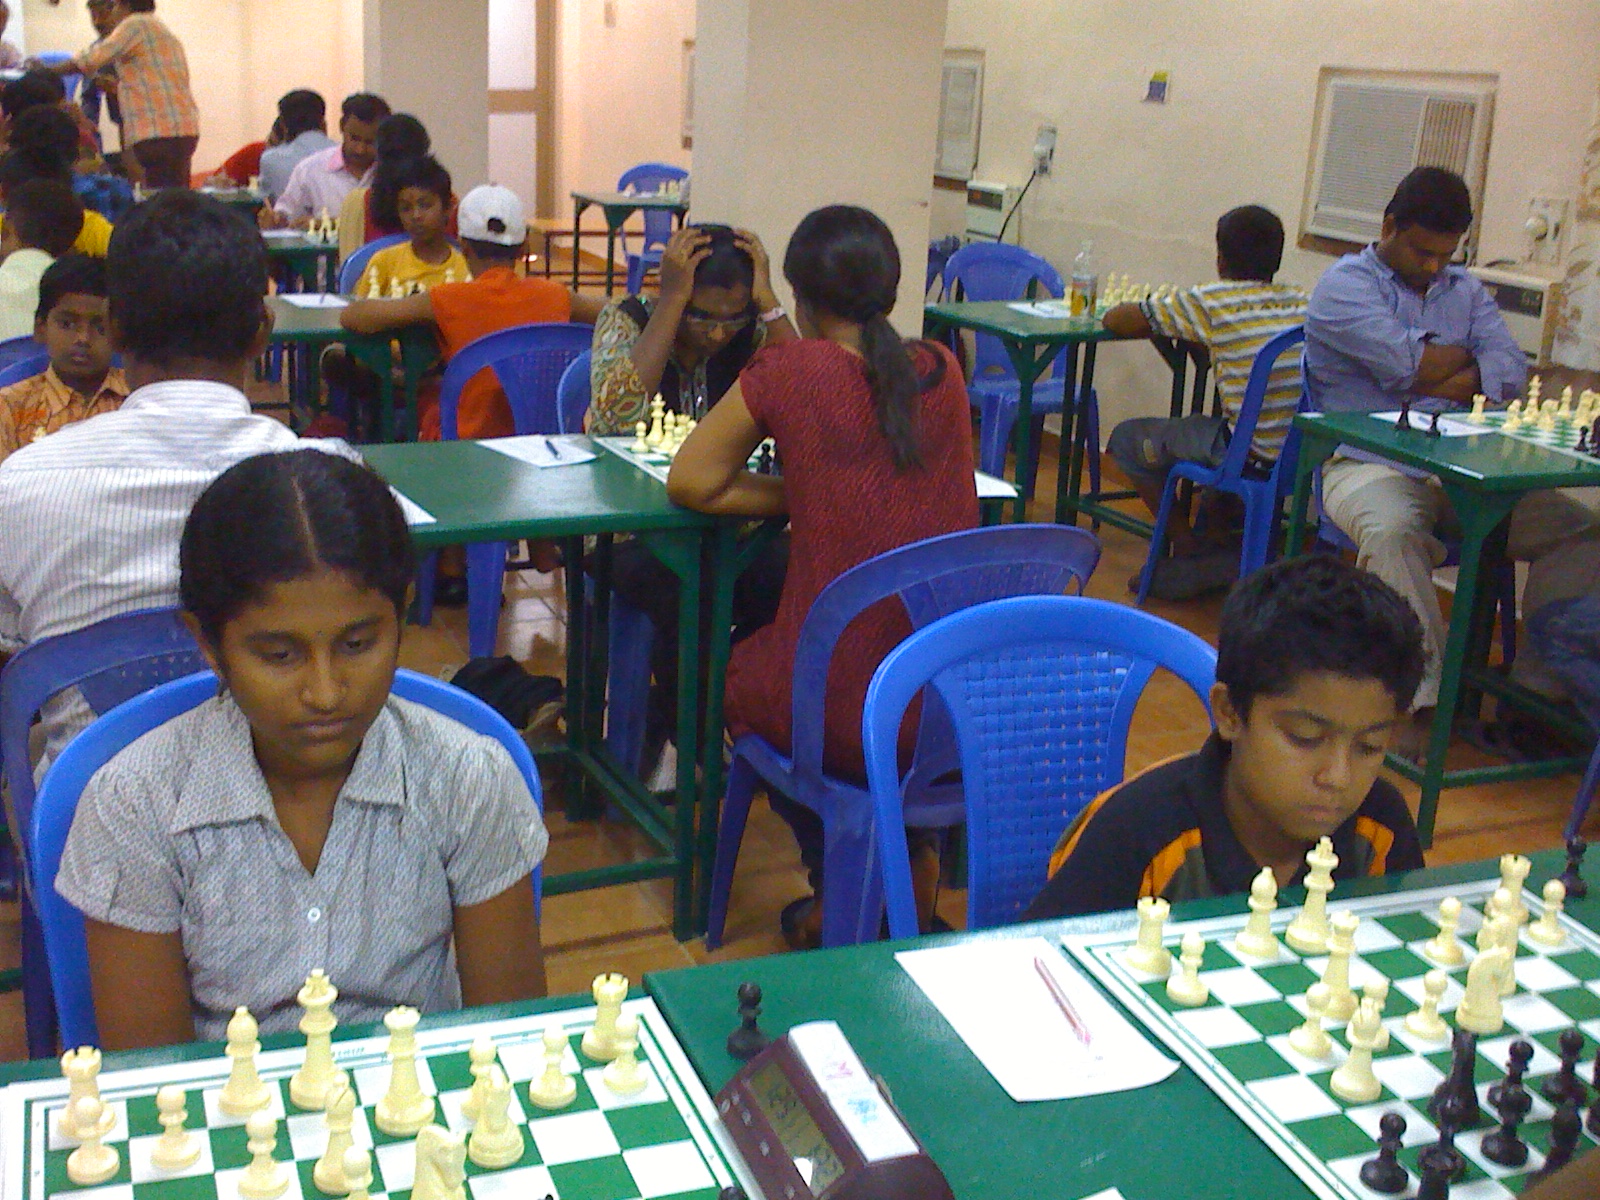 Augustin A - Bengaluru, : I am a chess player, with FIDE rating